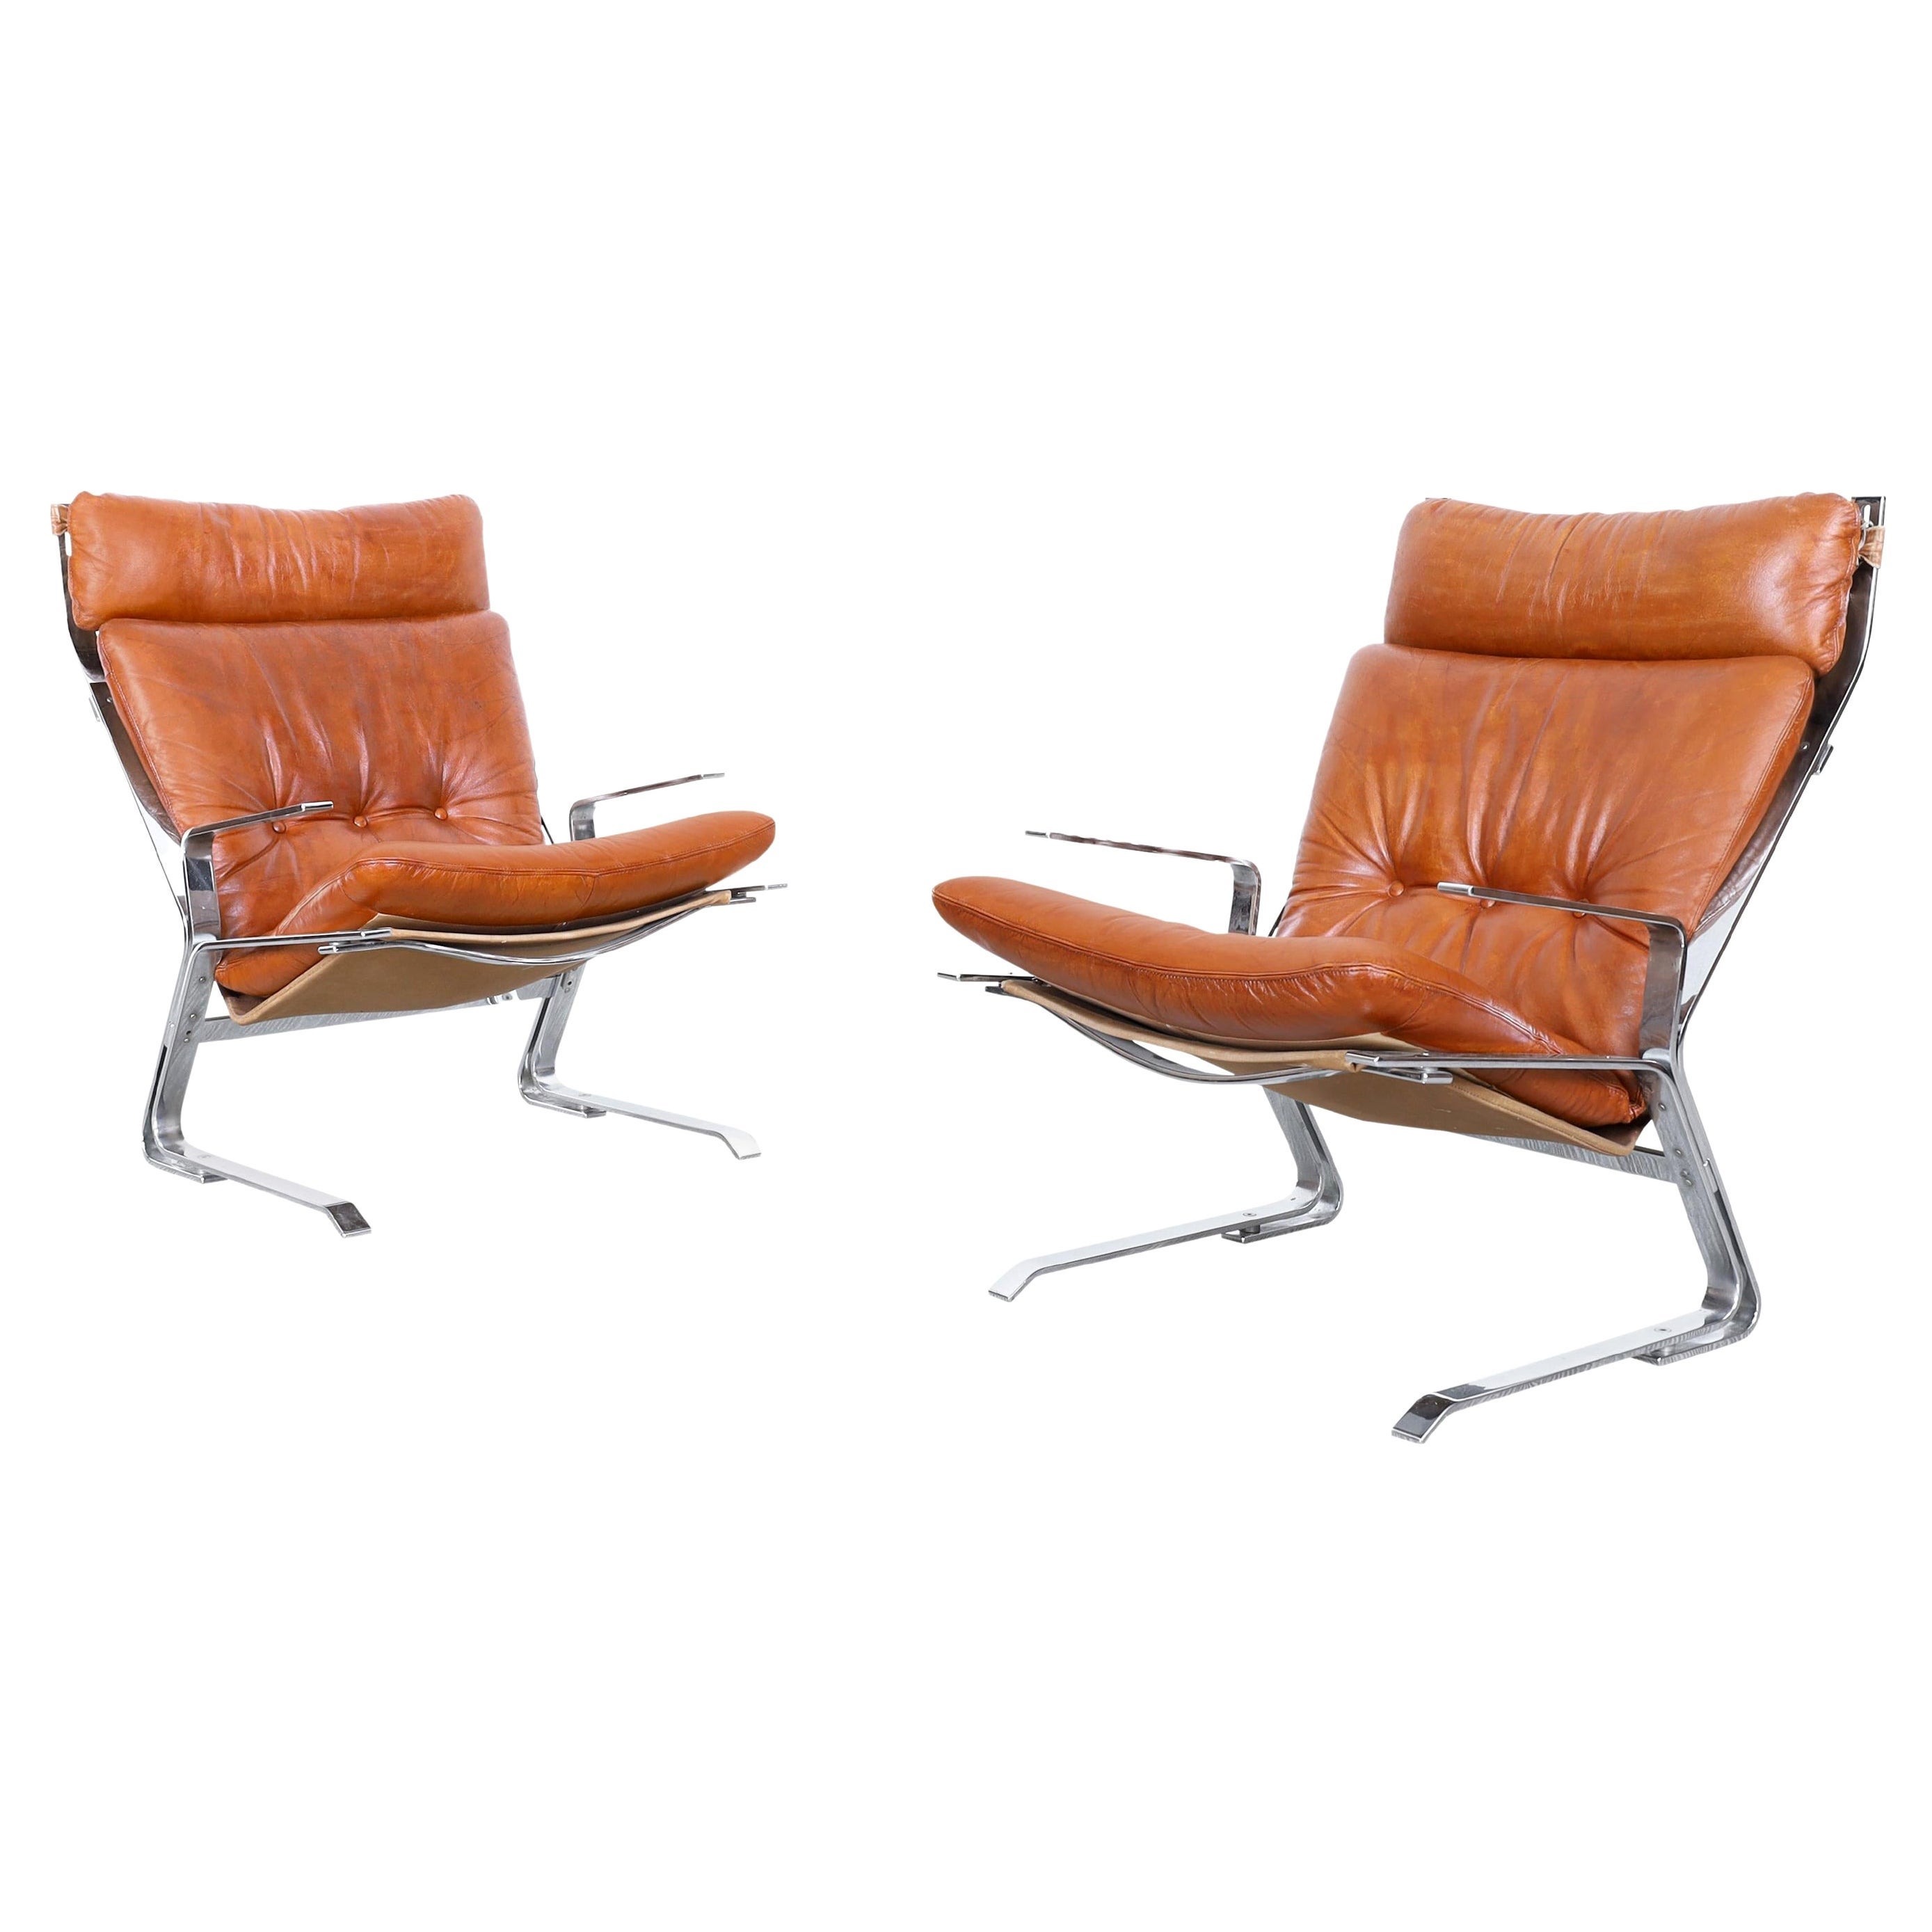 Vintage Leather and Chrome "Pirate" Lounge Chairs by Elsa and Nordahl Solheim For Sale